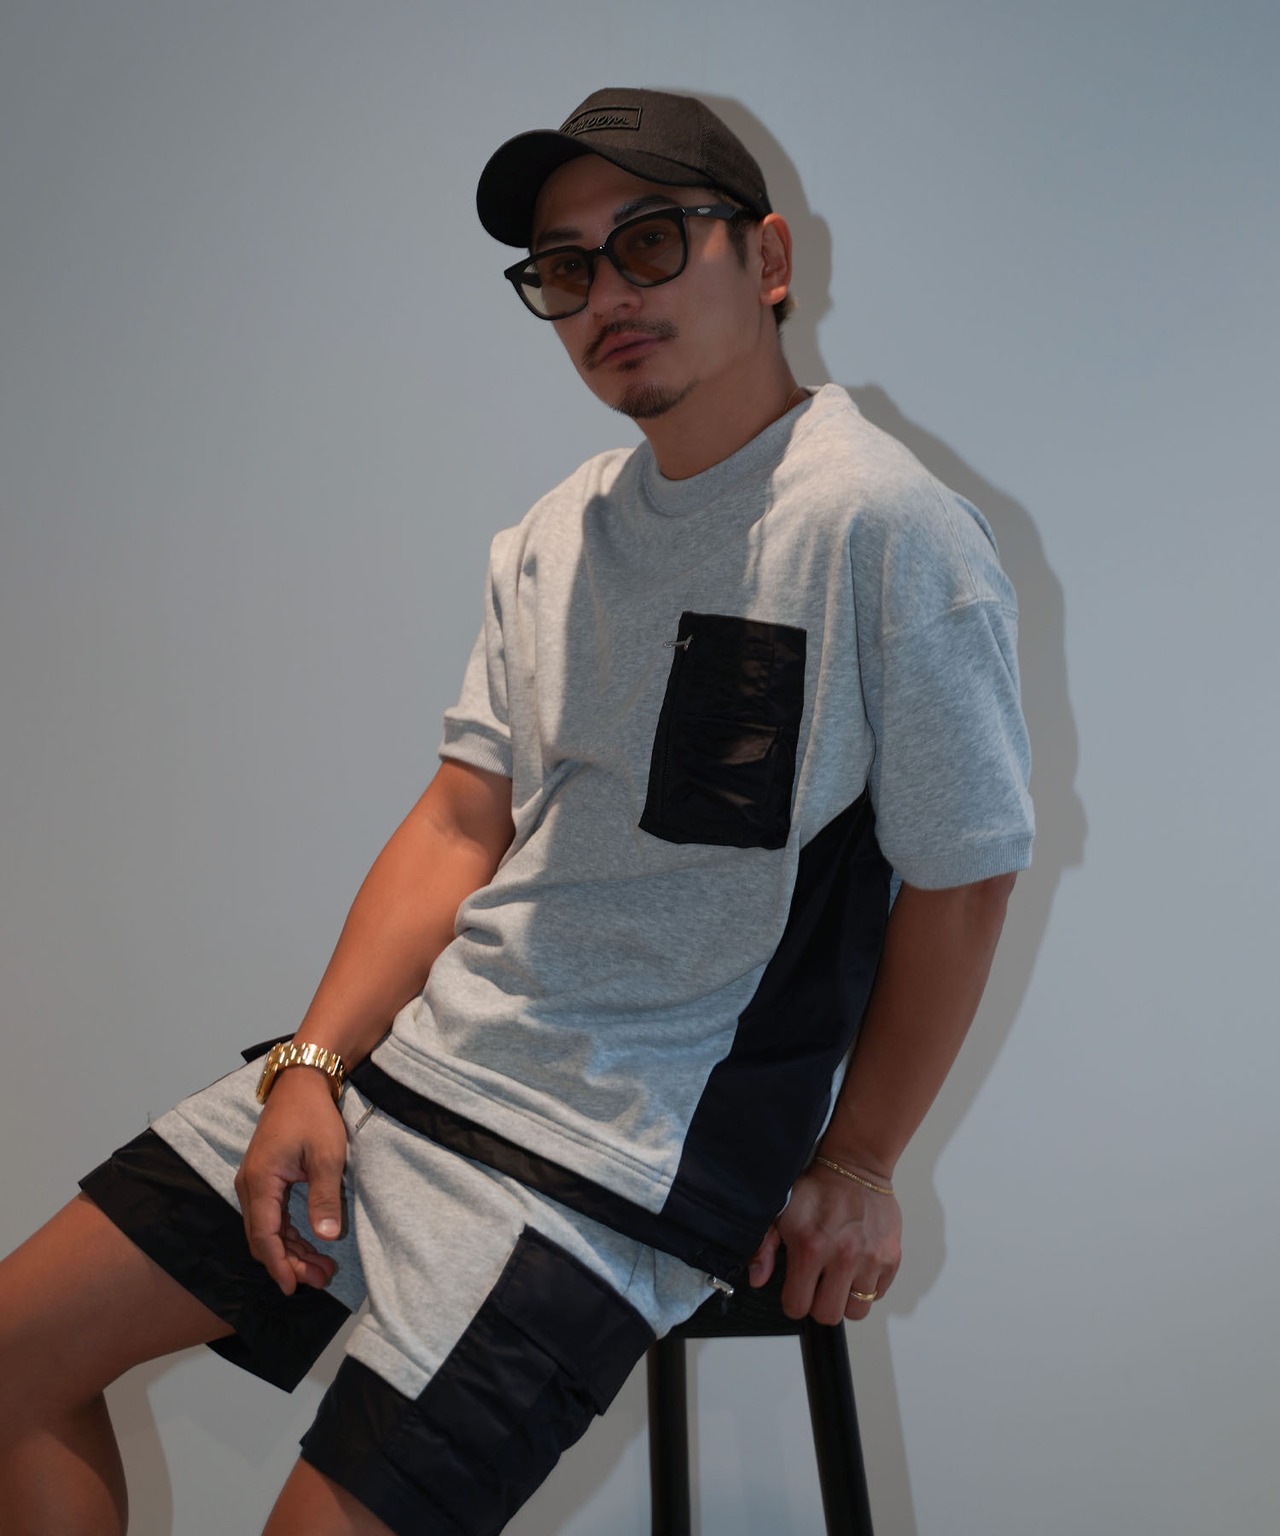 【#Re:room】NYRON SWITCHING MA-1 SWEAT T-SHIRTS［REC766］